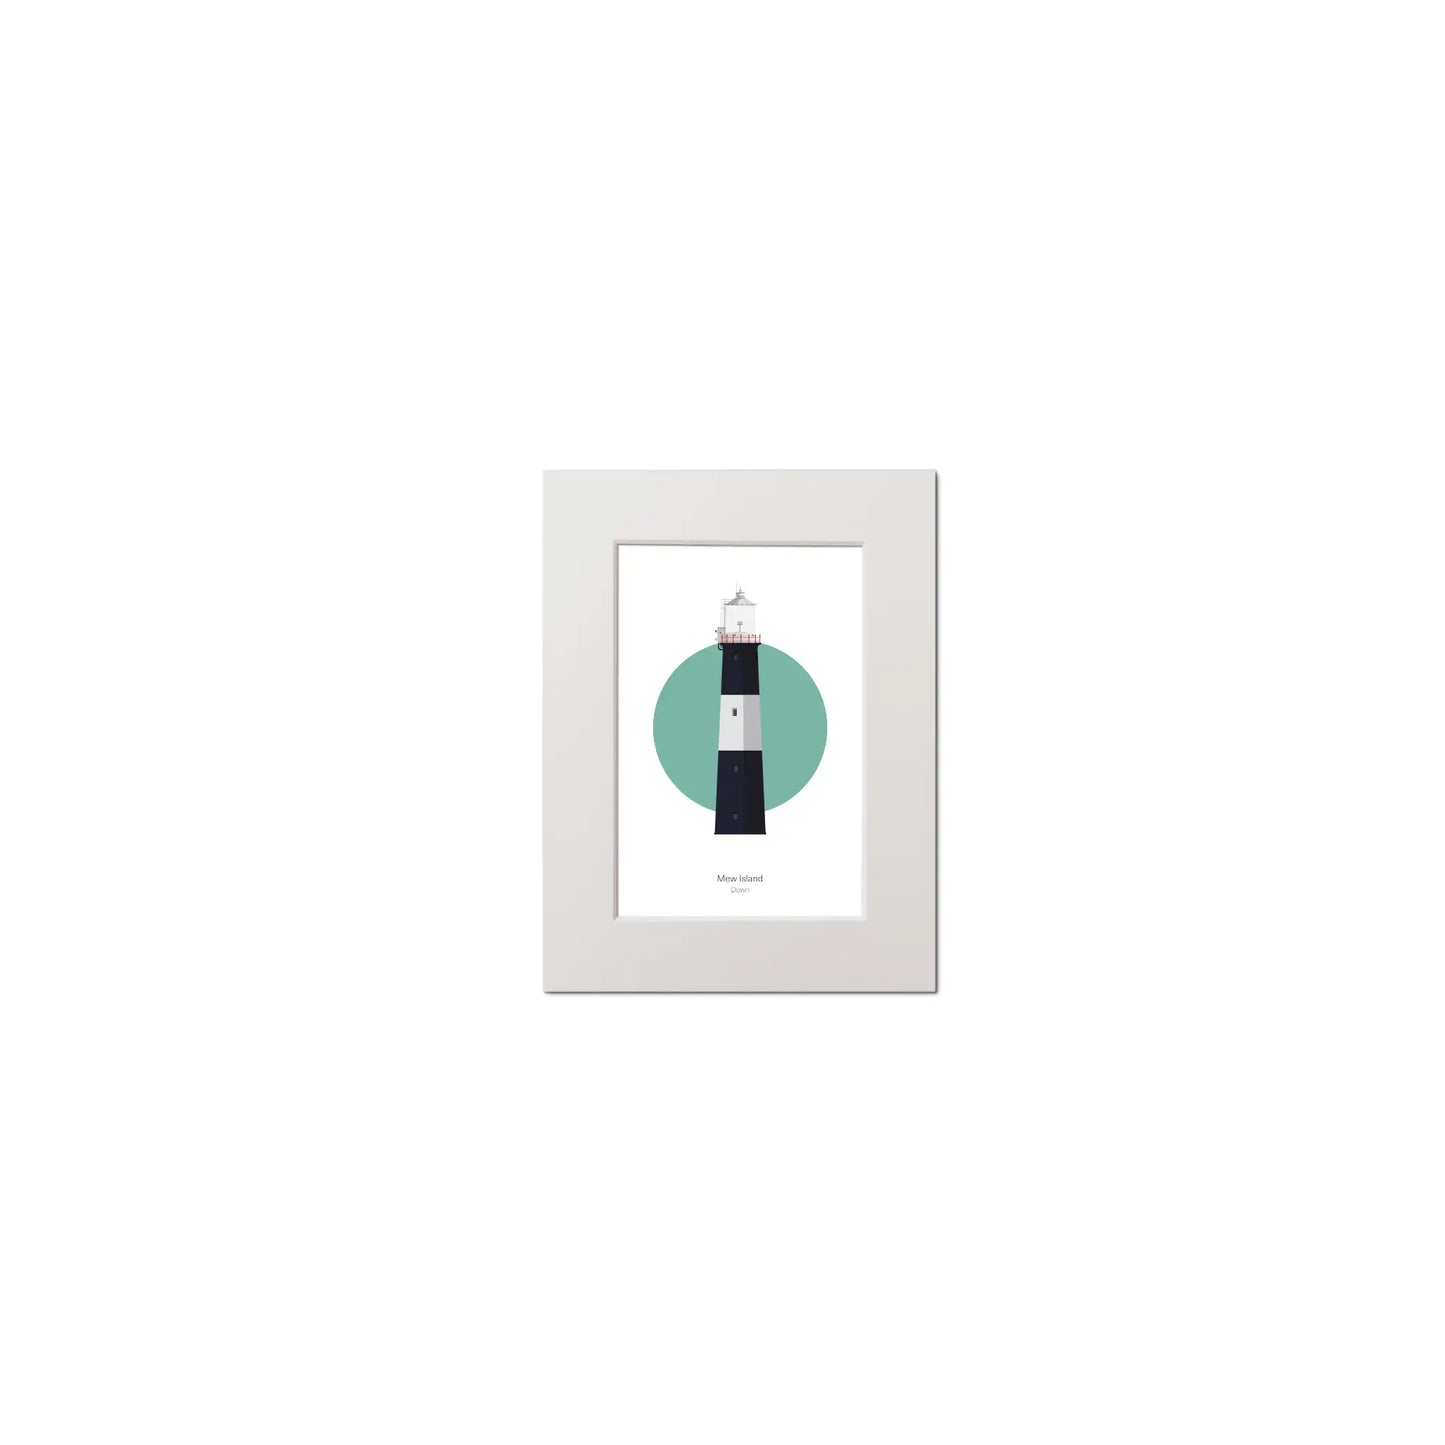 Contemporary graphic illustration of Mew Island lighthouse on a white background inside light blue square, mounted and measuring 15x20cm.